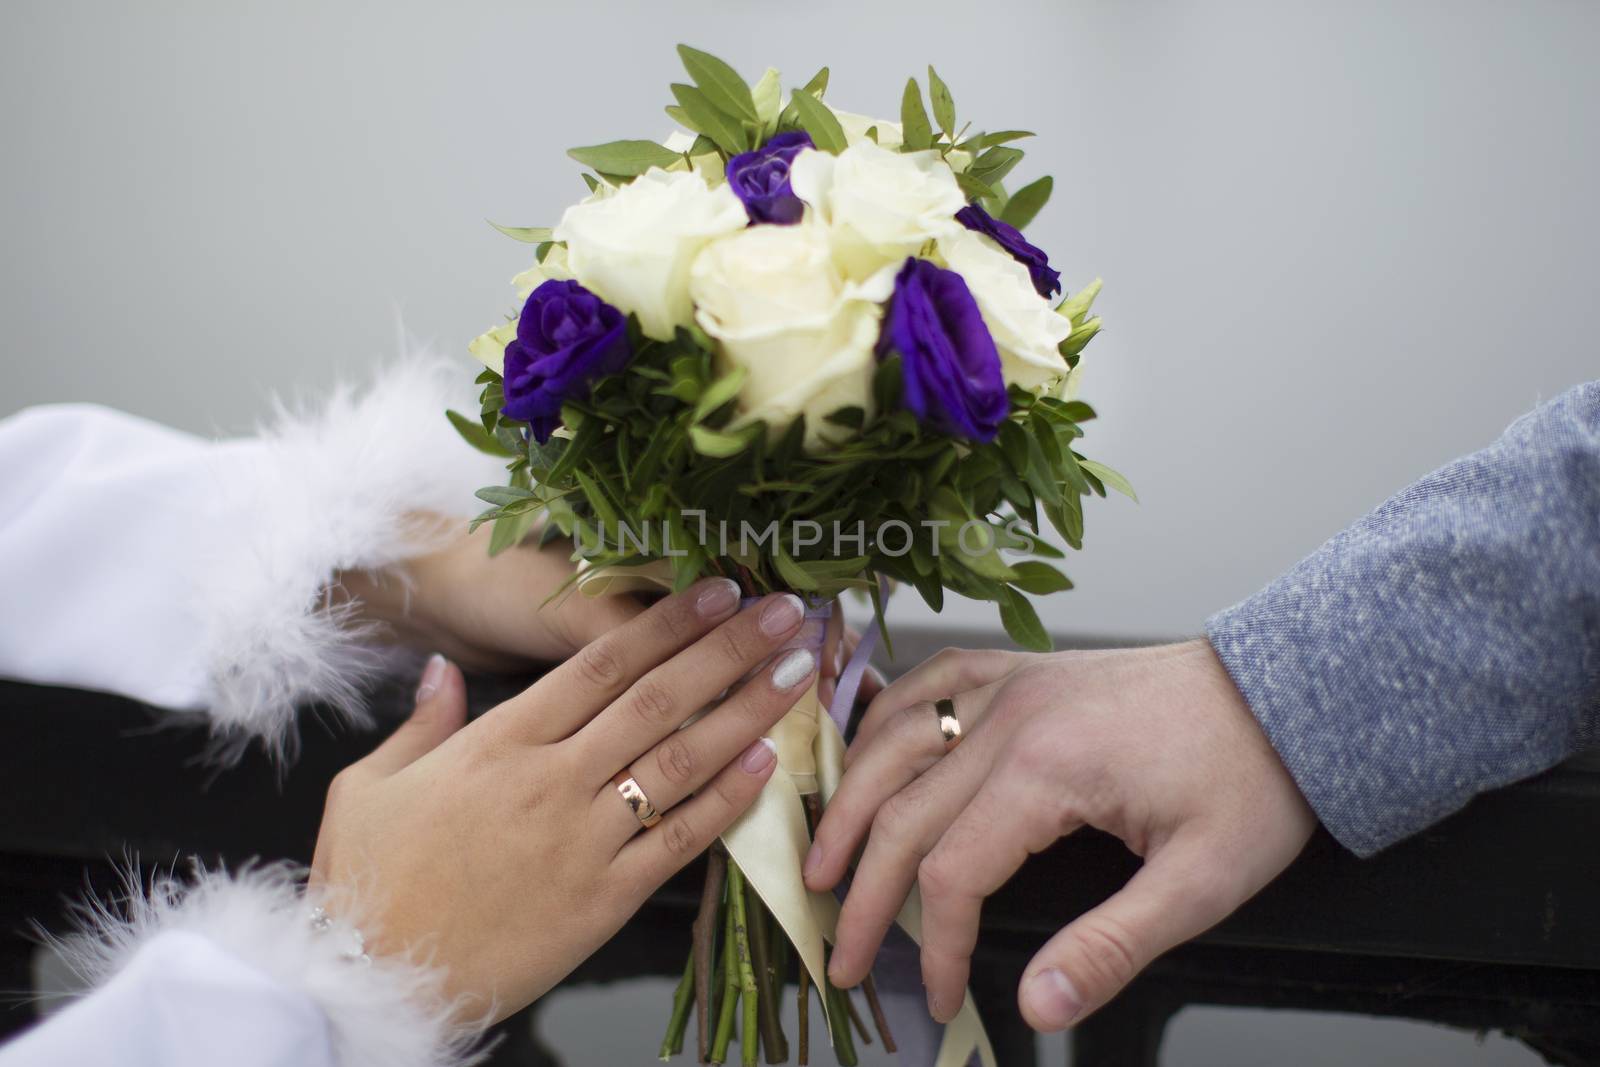 Bridal bouquet and hands with wedding rings. The bride's bouquet. Wedding rings.